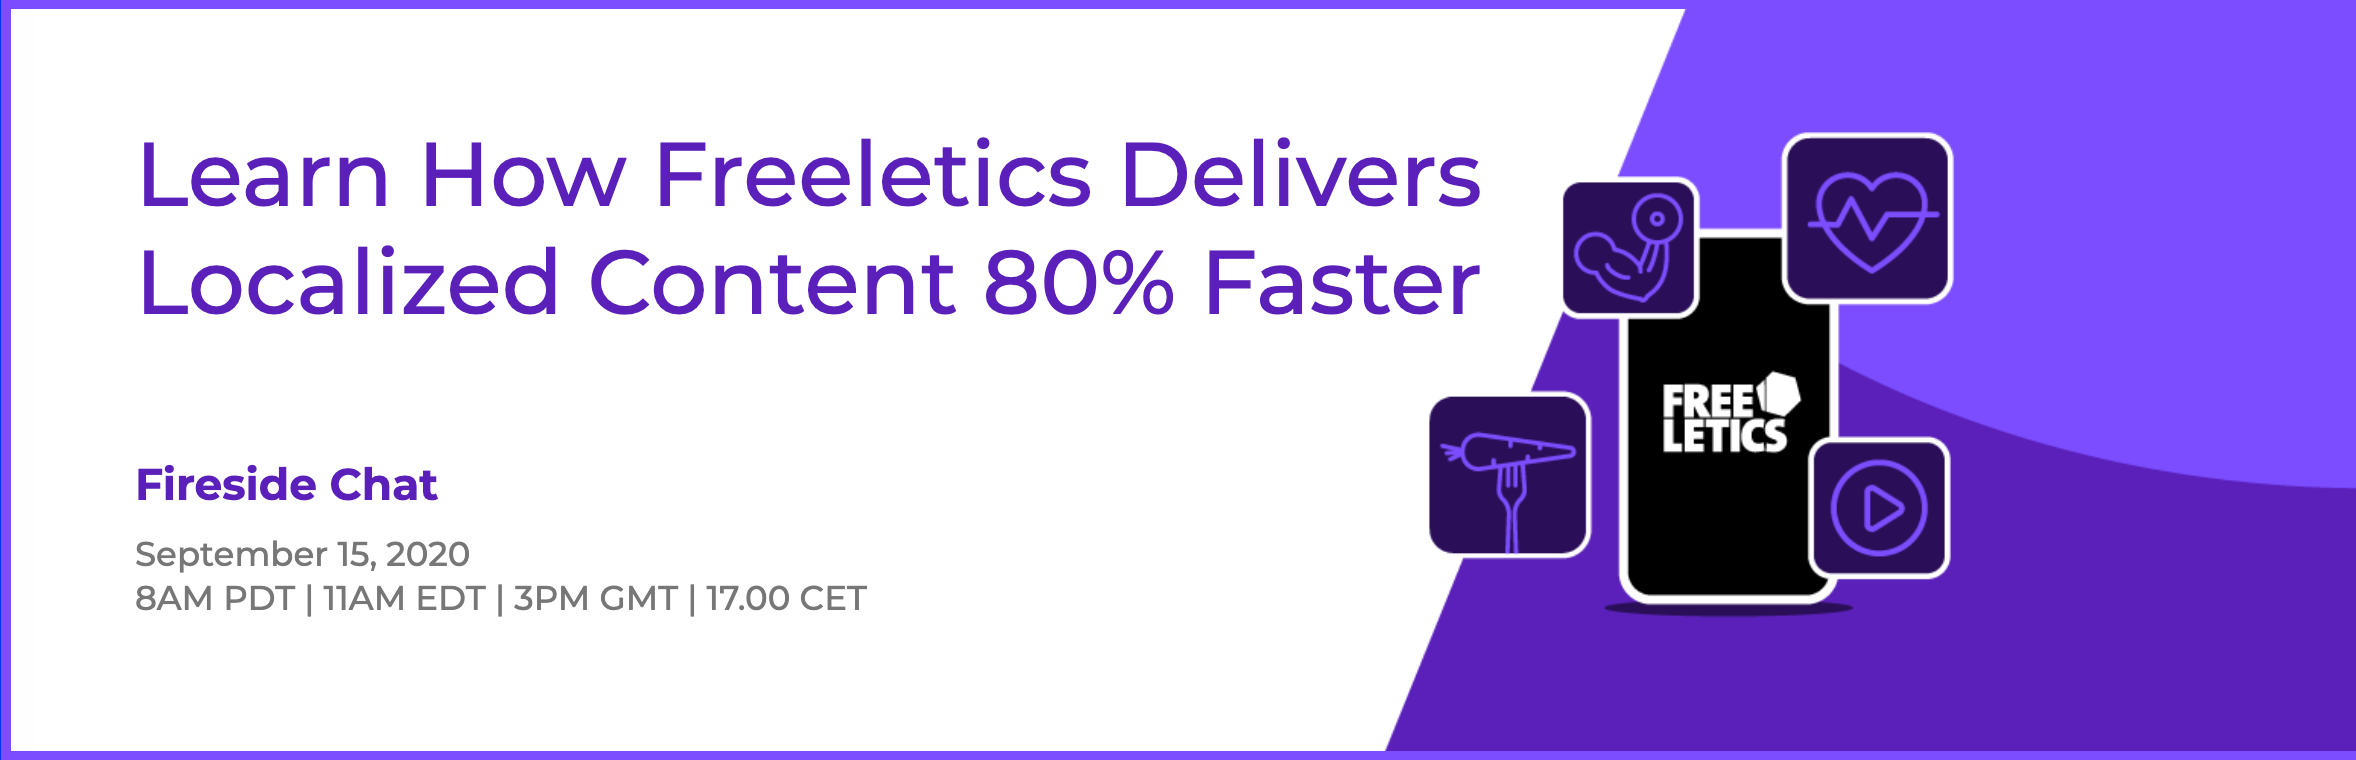 How Freeletics delivers content faster webinar